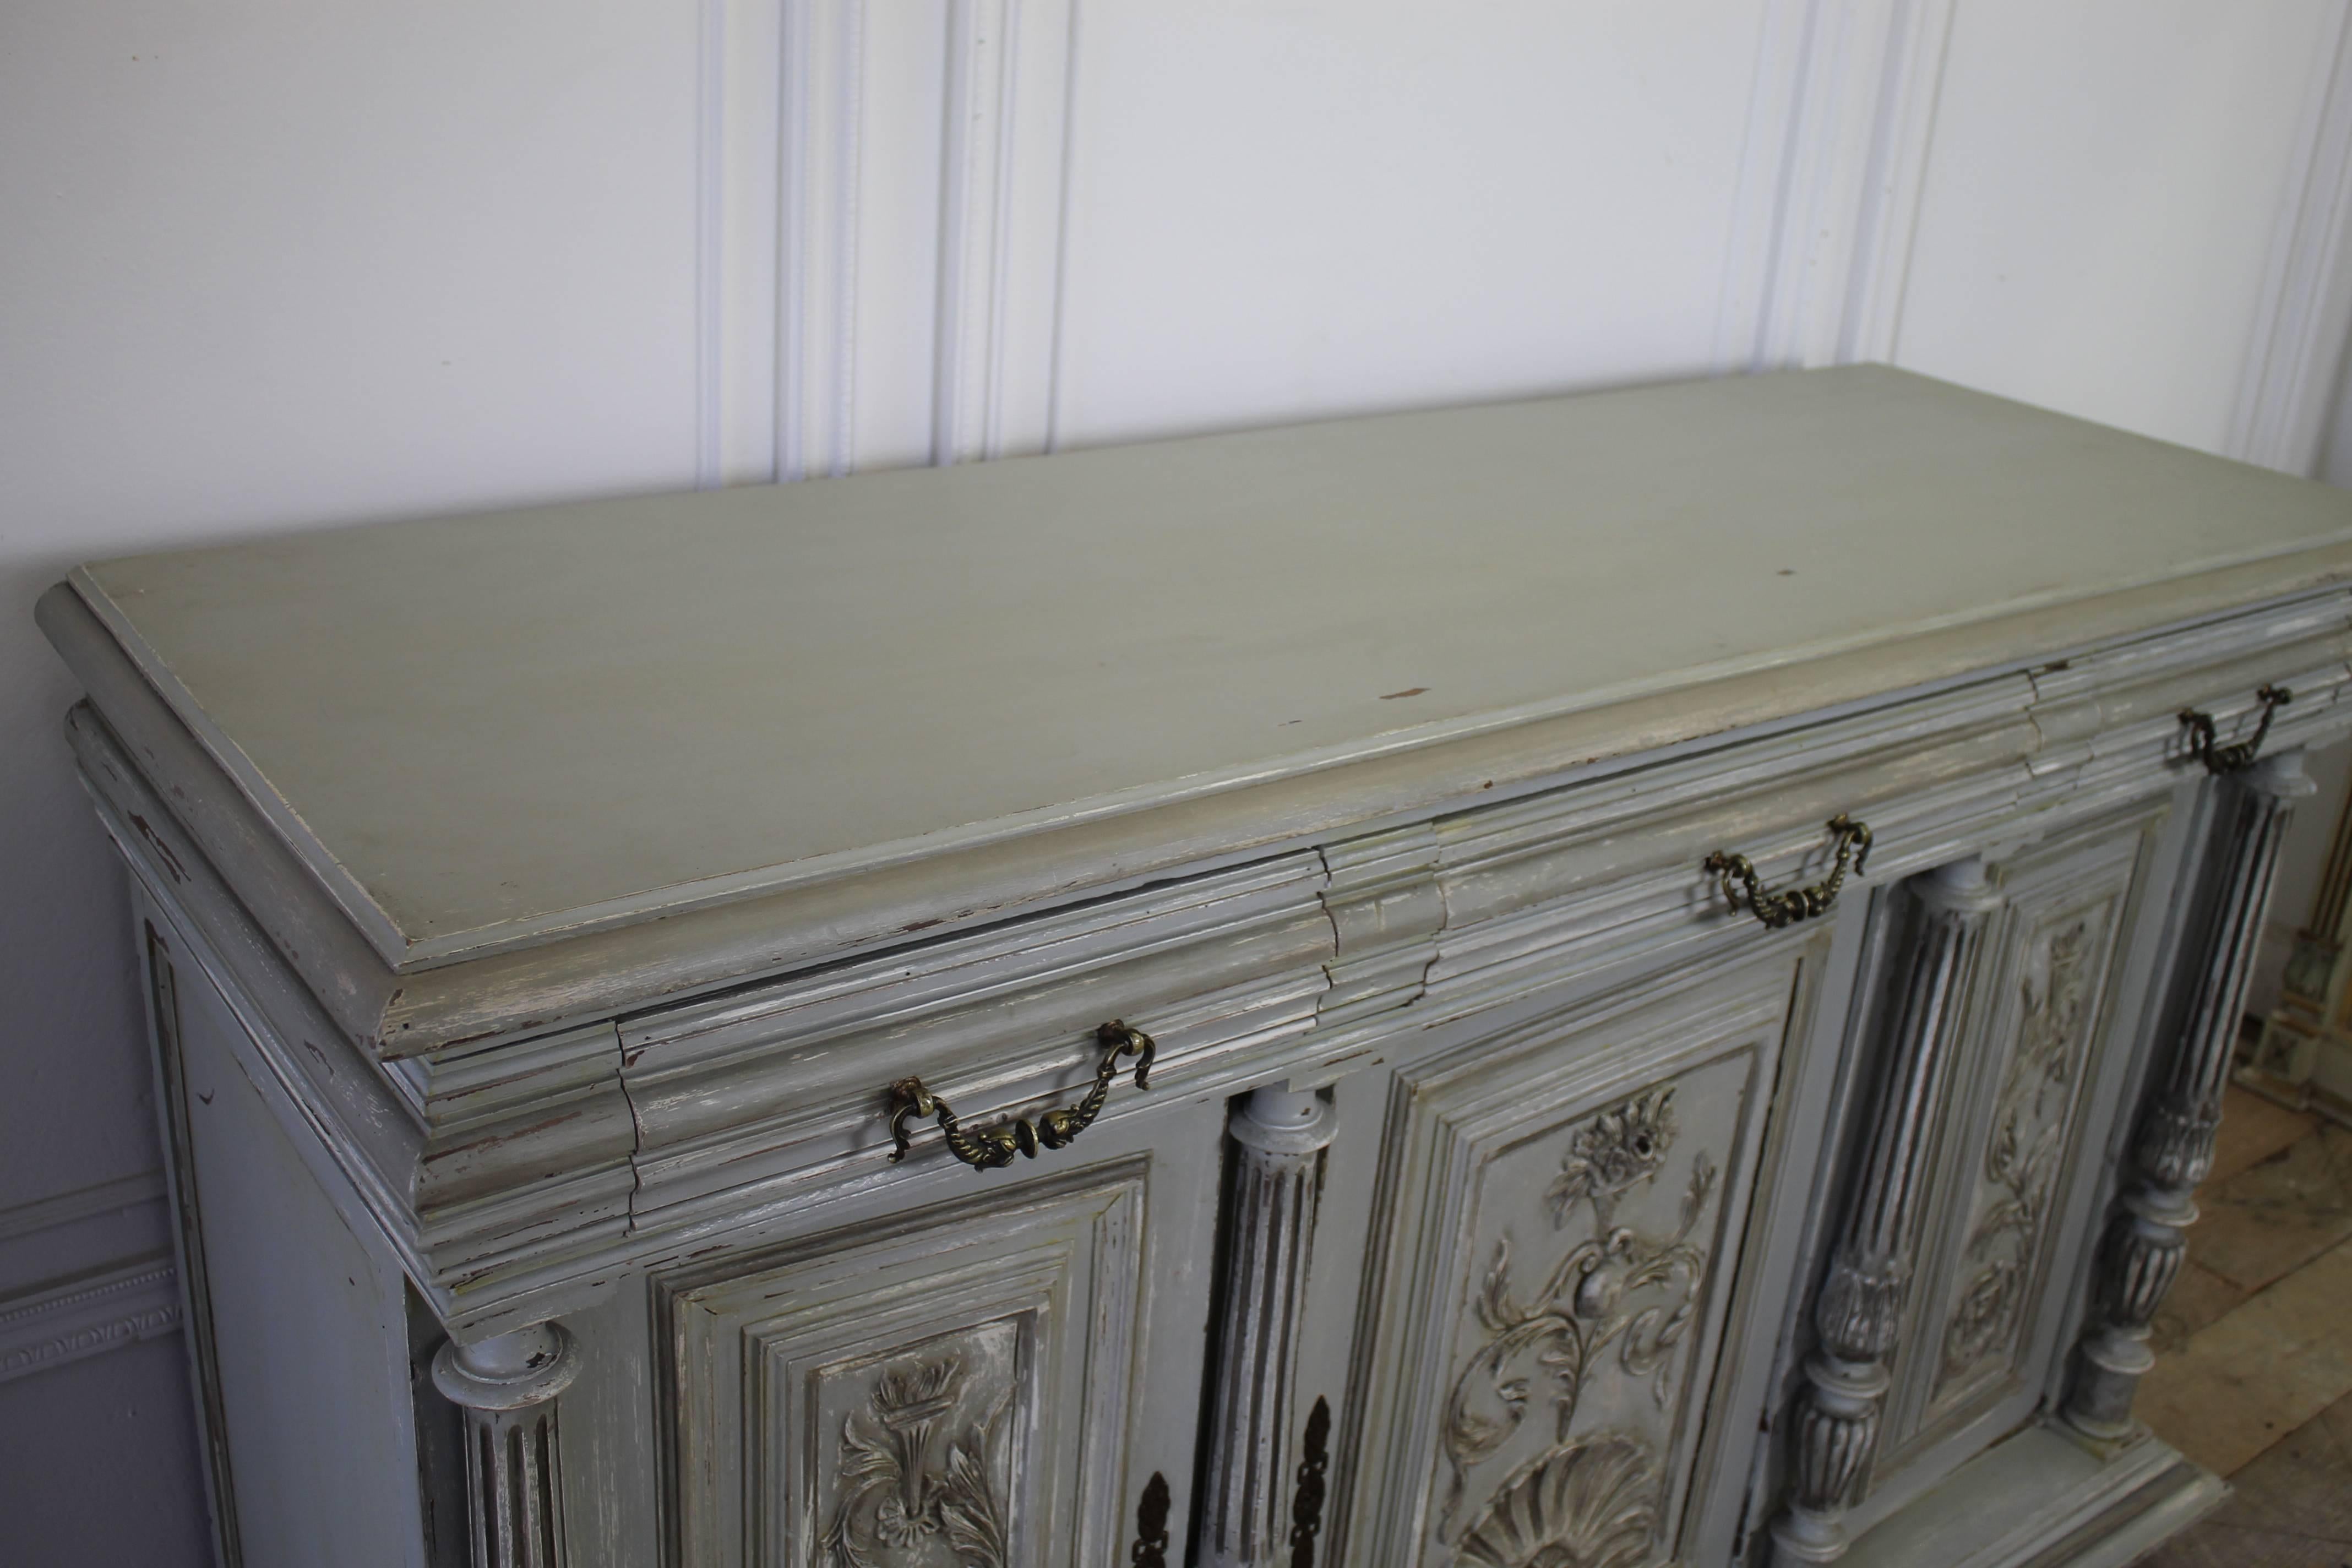 Early 20th century antique Italian painted oak server
Painted in a medium grey color with distressed style finish. Three drawers, and three doors open up to ample storage.
Drawers open and close nice, the bottom doors open and close with ease, the